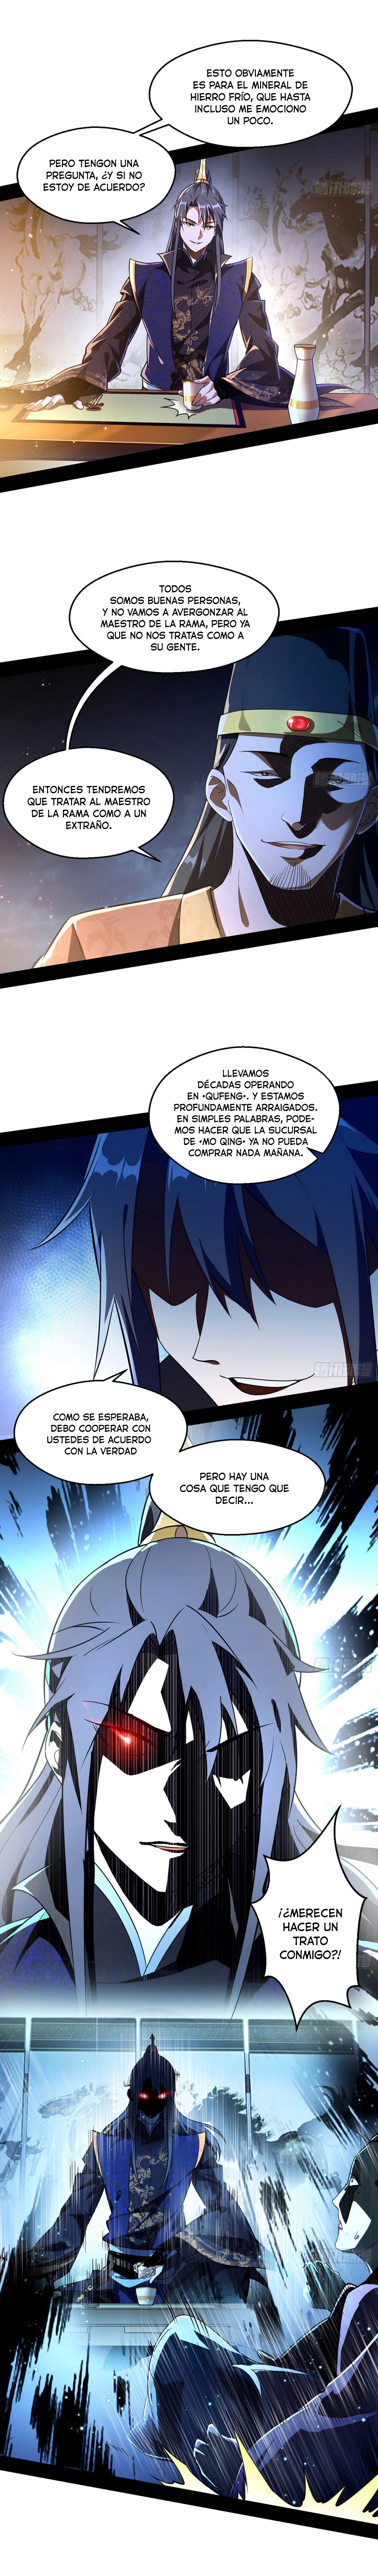 Manga Soy un dios maligno Chapter 74 image number 5